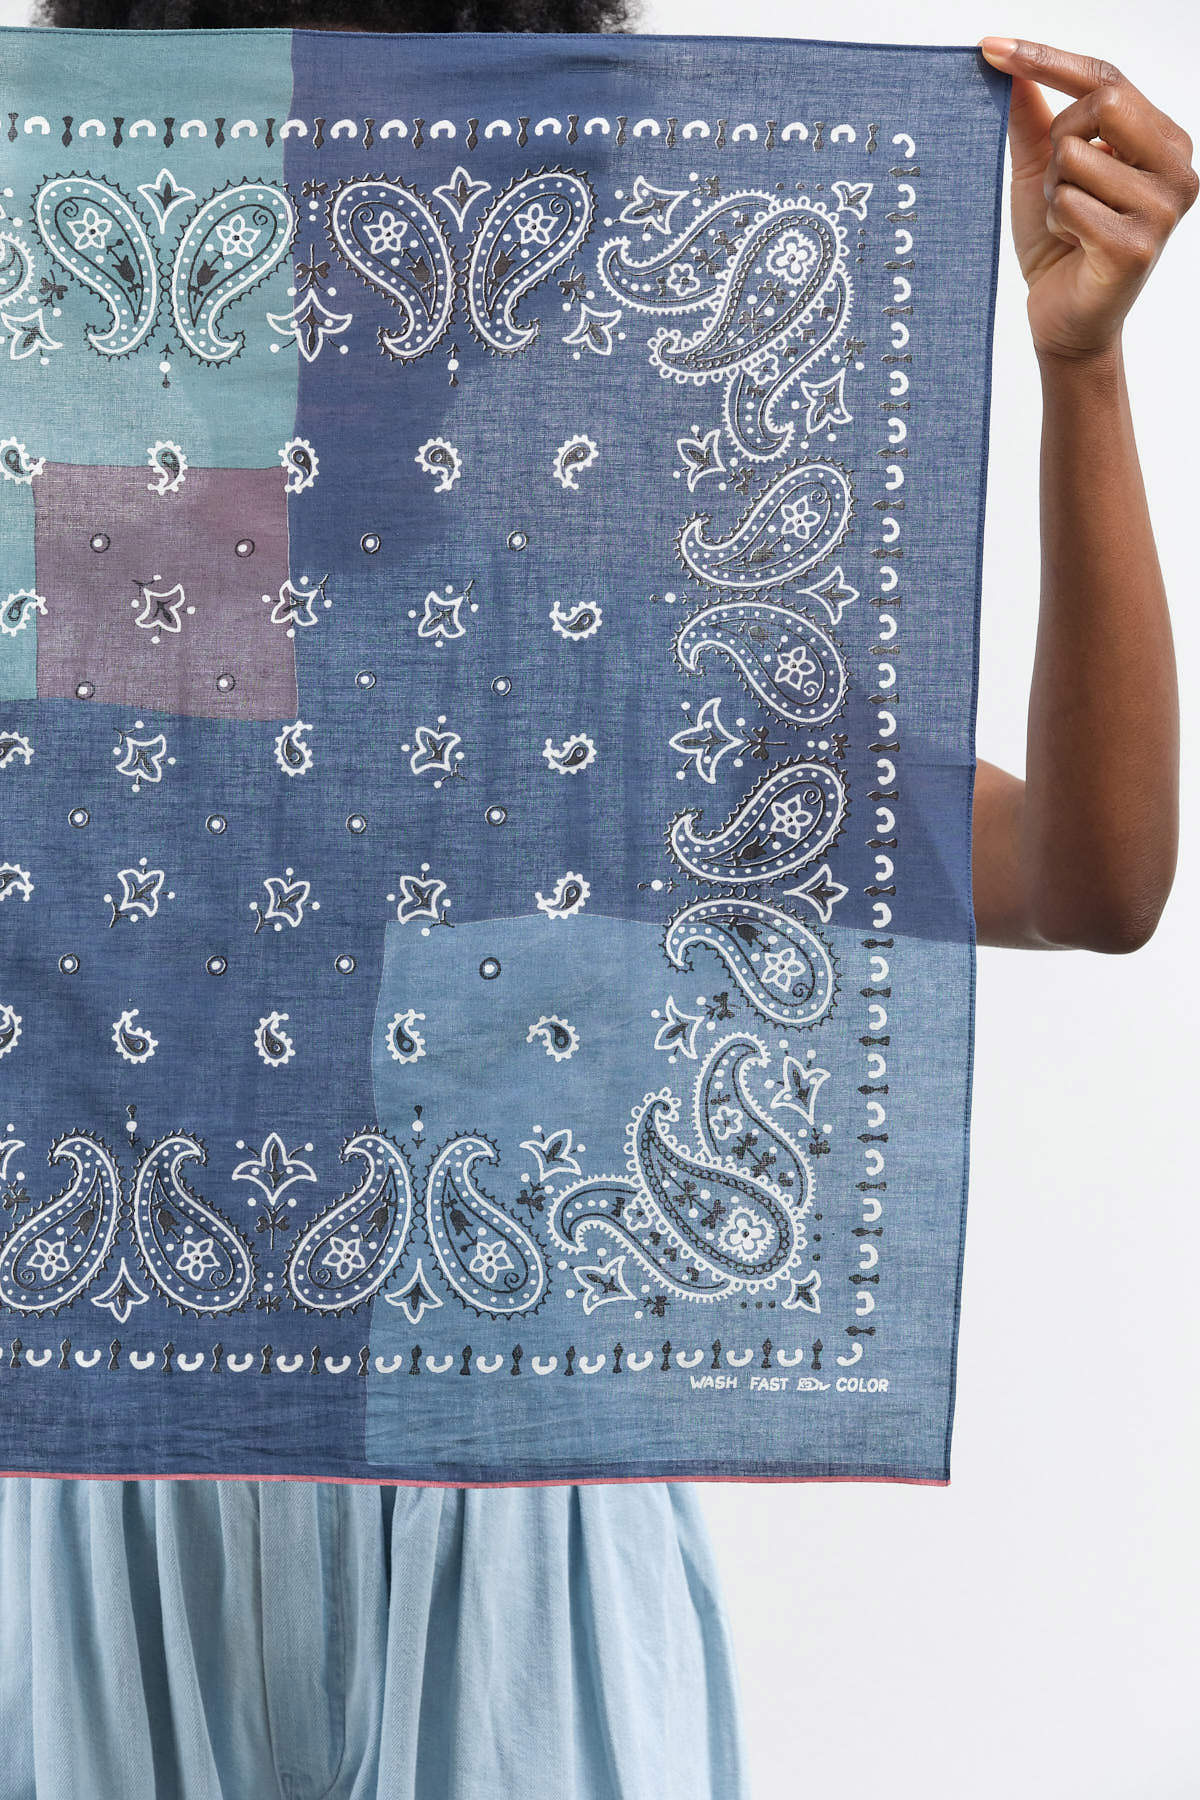 Paisley Patchwork Fastcolor Selvedge Bandana by Kapital in Navy